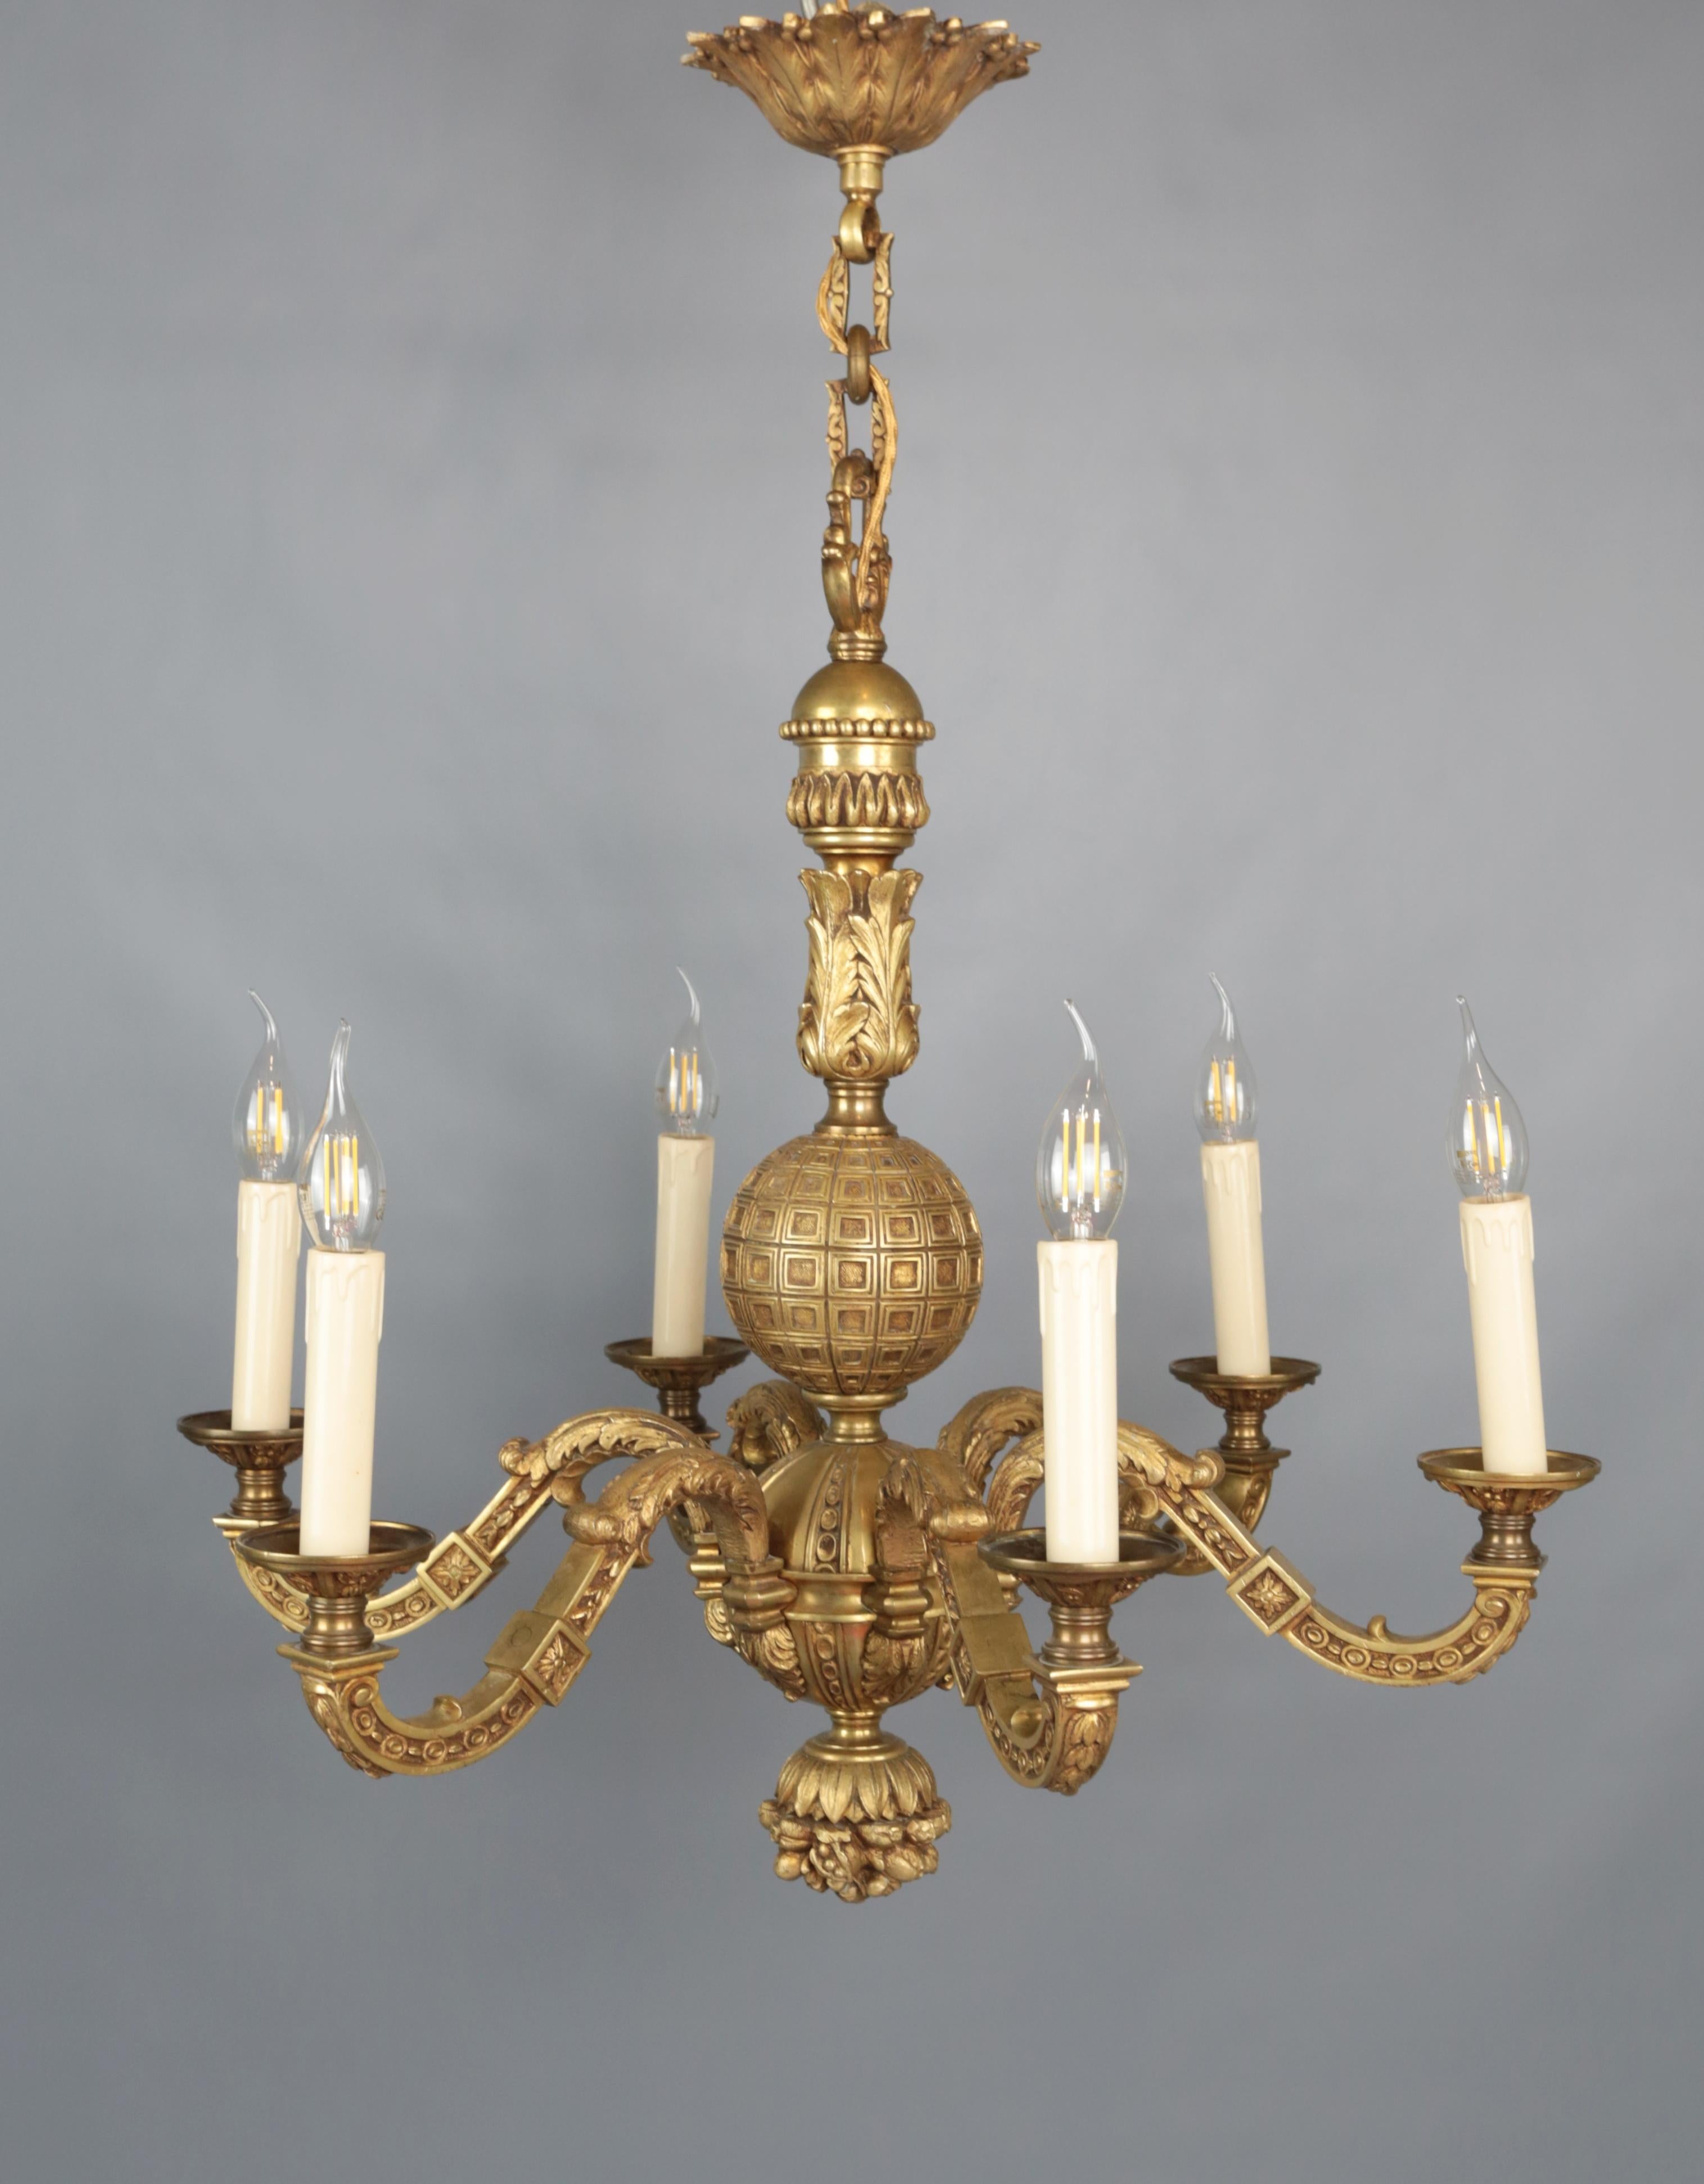 French Antique Mazarin Pineapple Chandelier For Sale